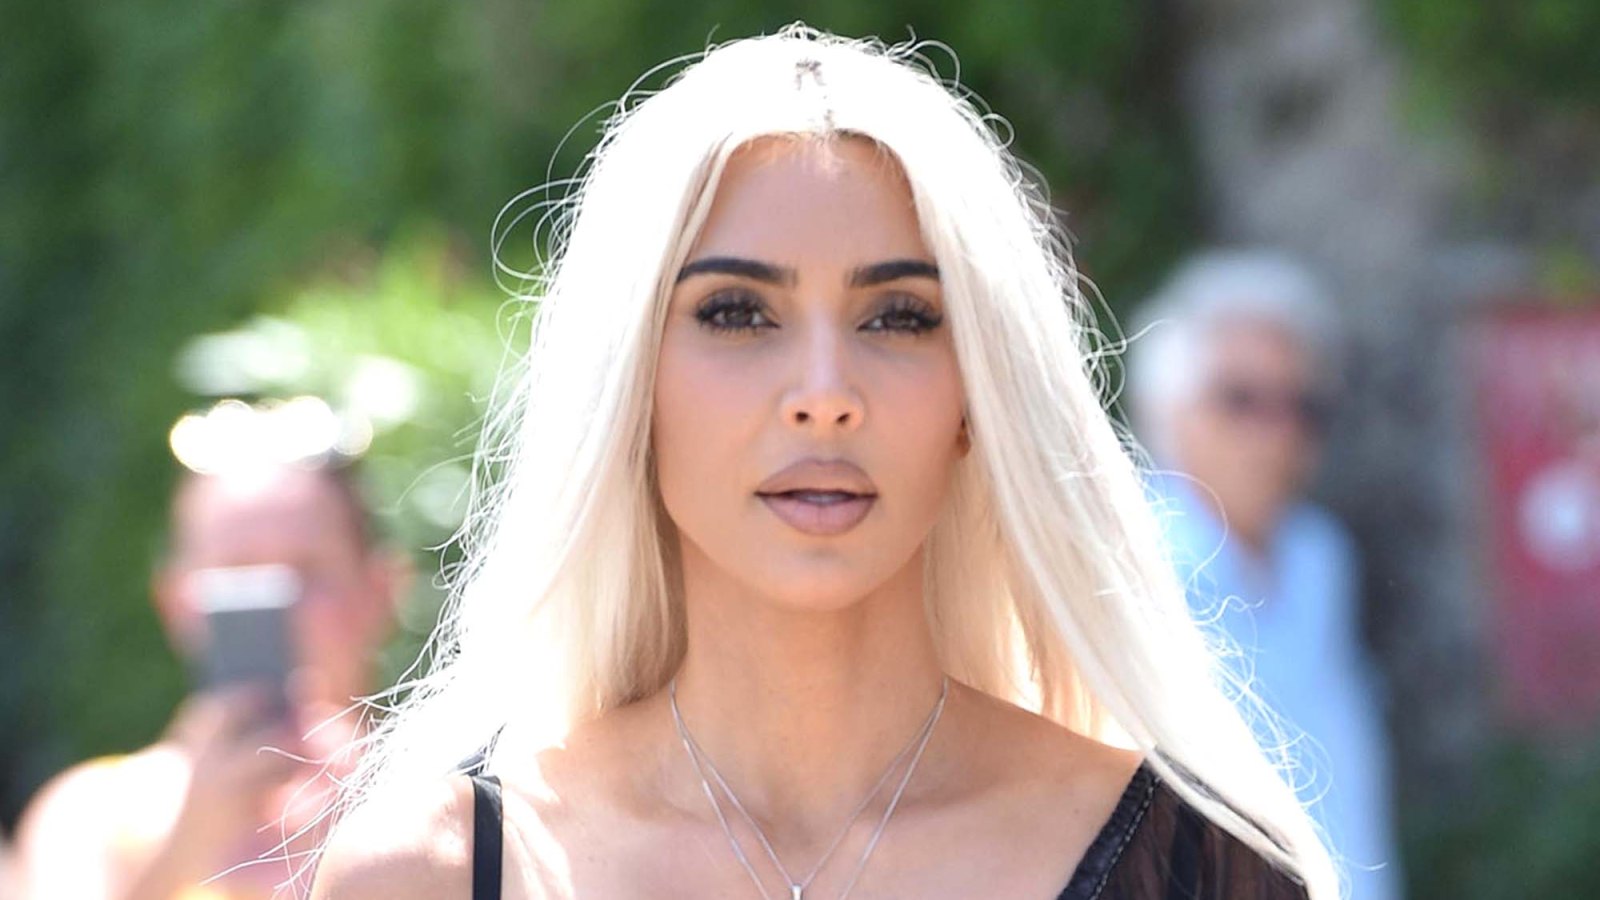 Kim Kardashian Claps Back at Accusation She Faked Eating New Ad Campaign